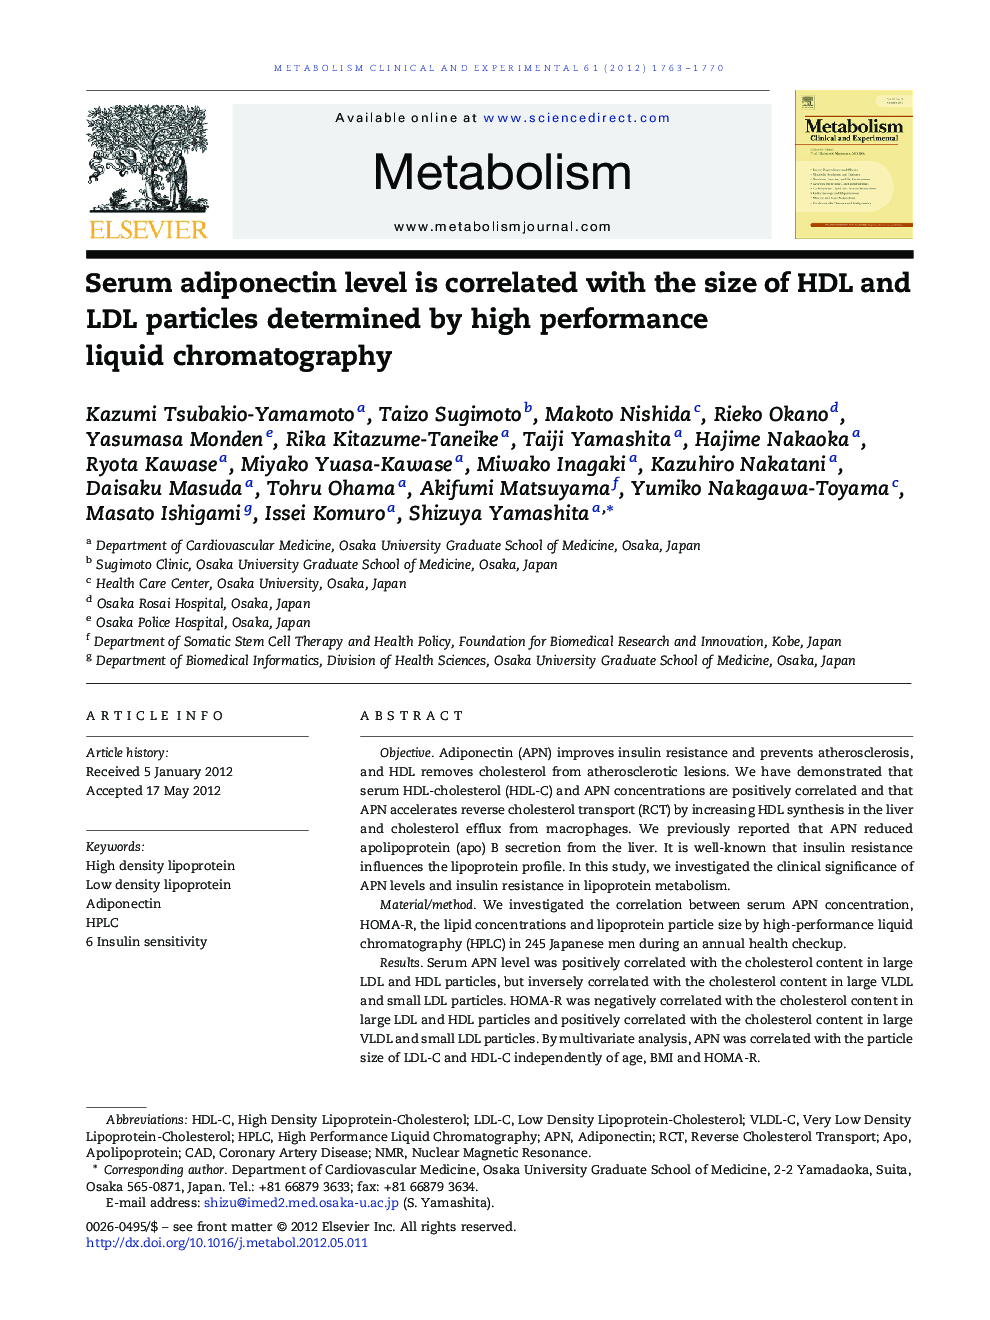 Serum adiponectin level is correlated with the size of HDL and LDL particles determined by high performance liquid chromatography